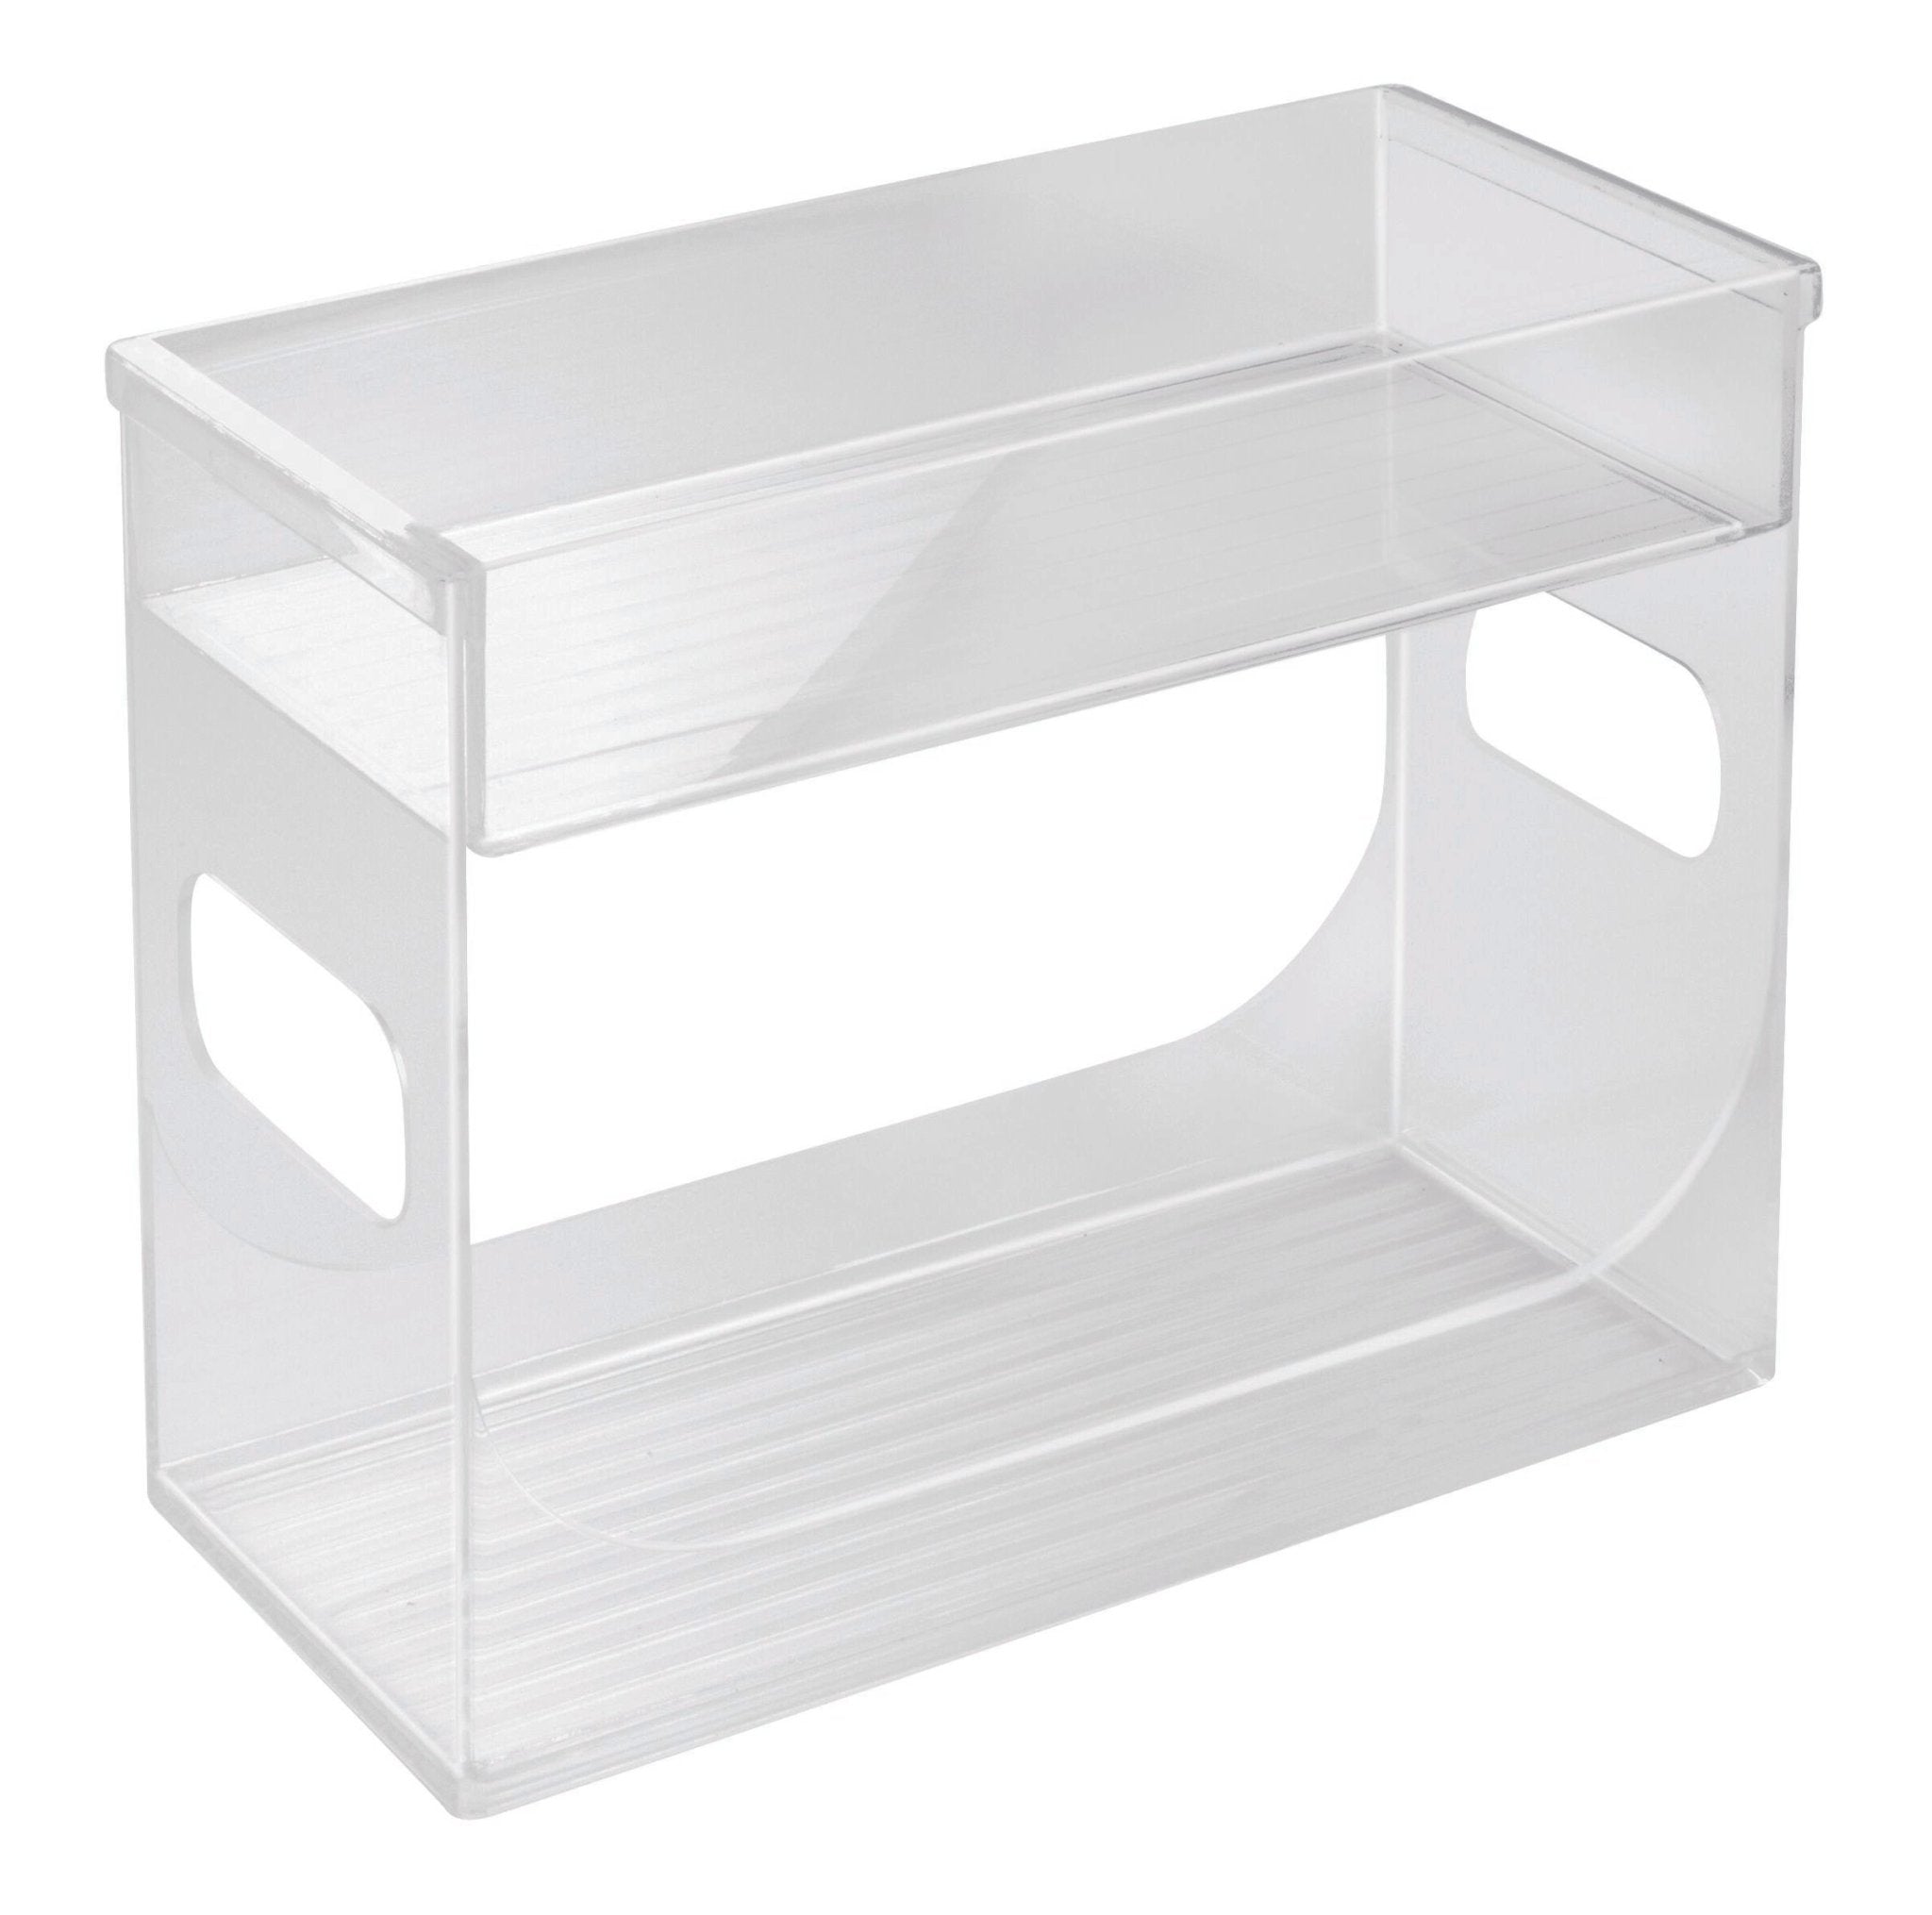 idesign binz - storage tank clear - on two levels - BINS AND BOXES